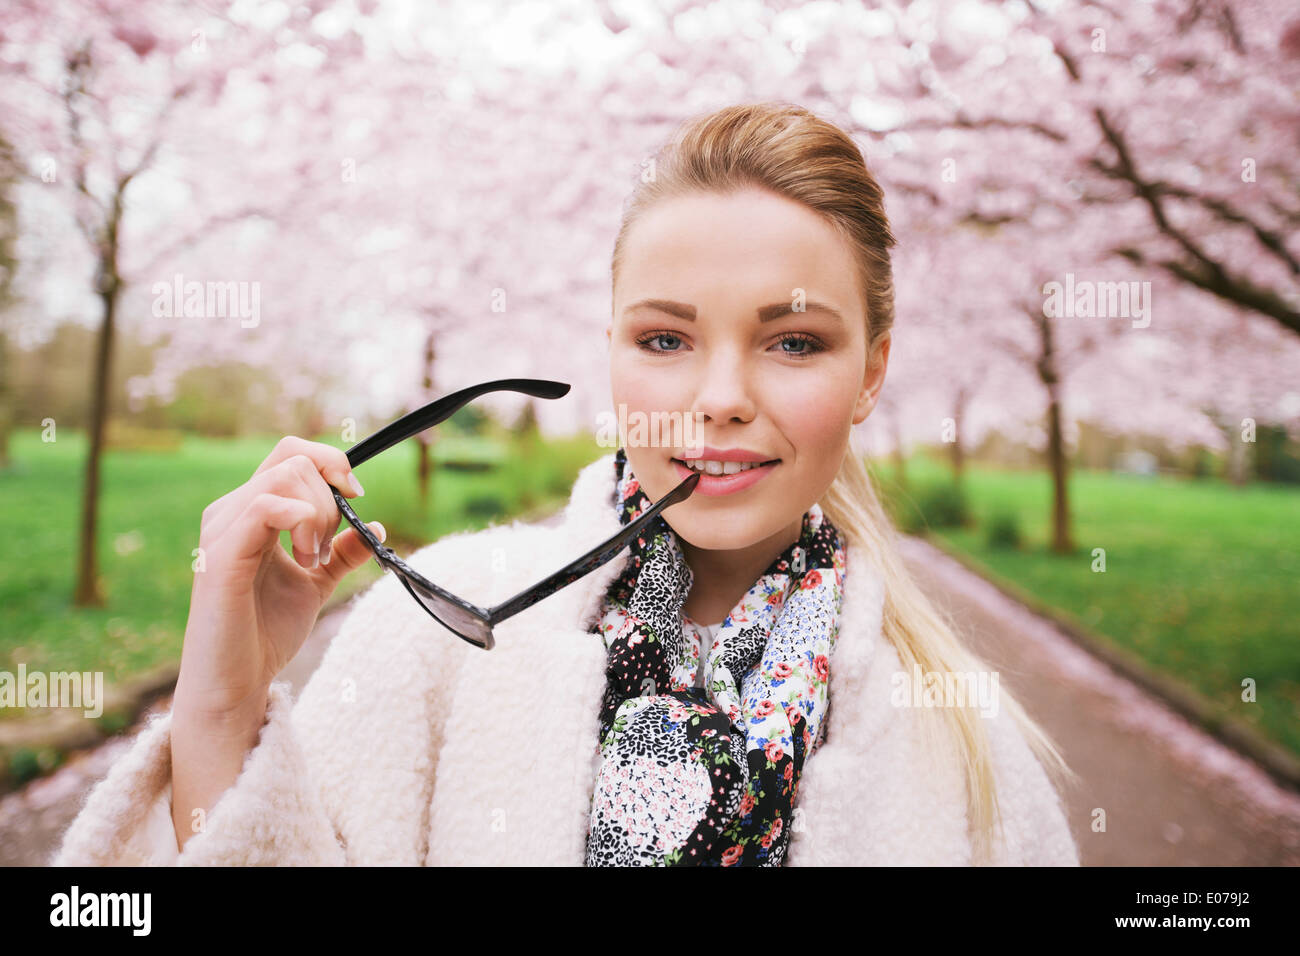 Pretty young woman at spring park holding sunglasses looking at camera. Caucasian female model posing at spring blossom park. Stock Photo